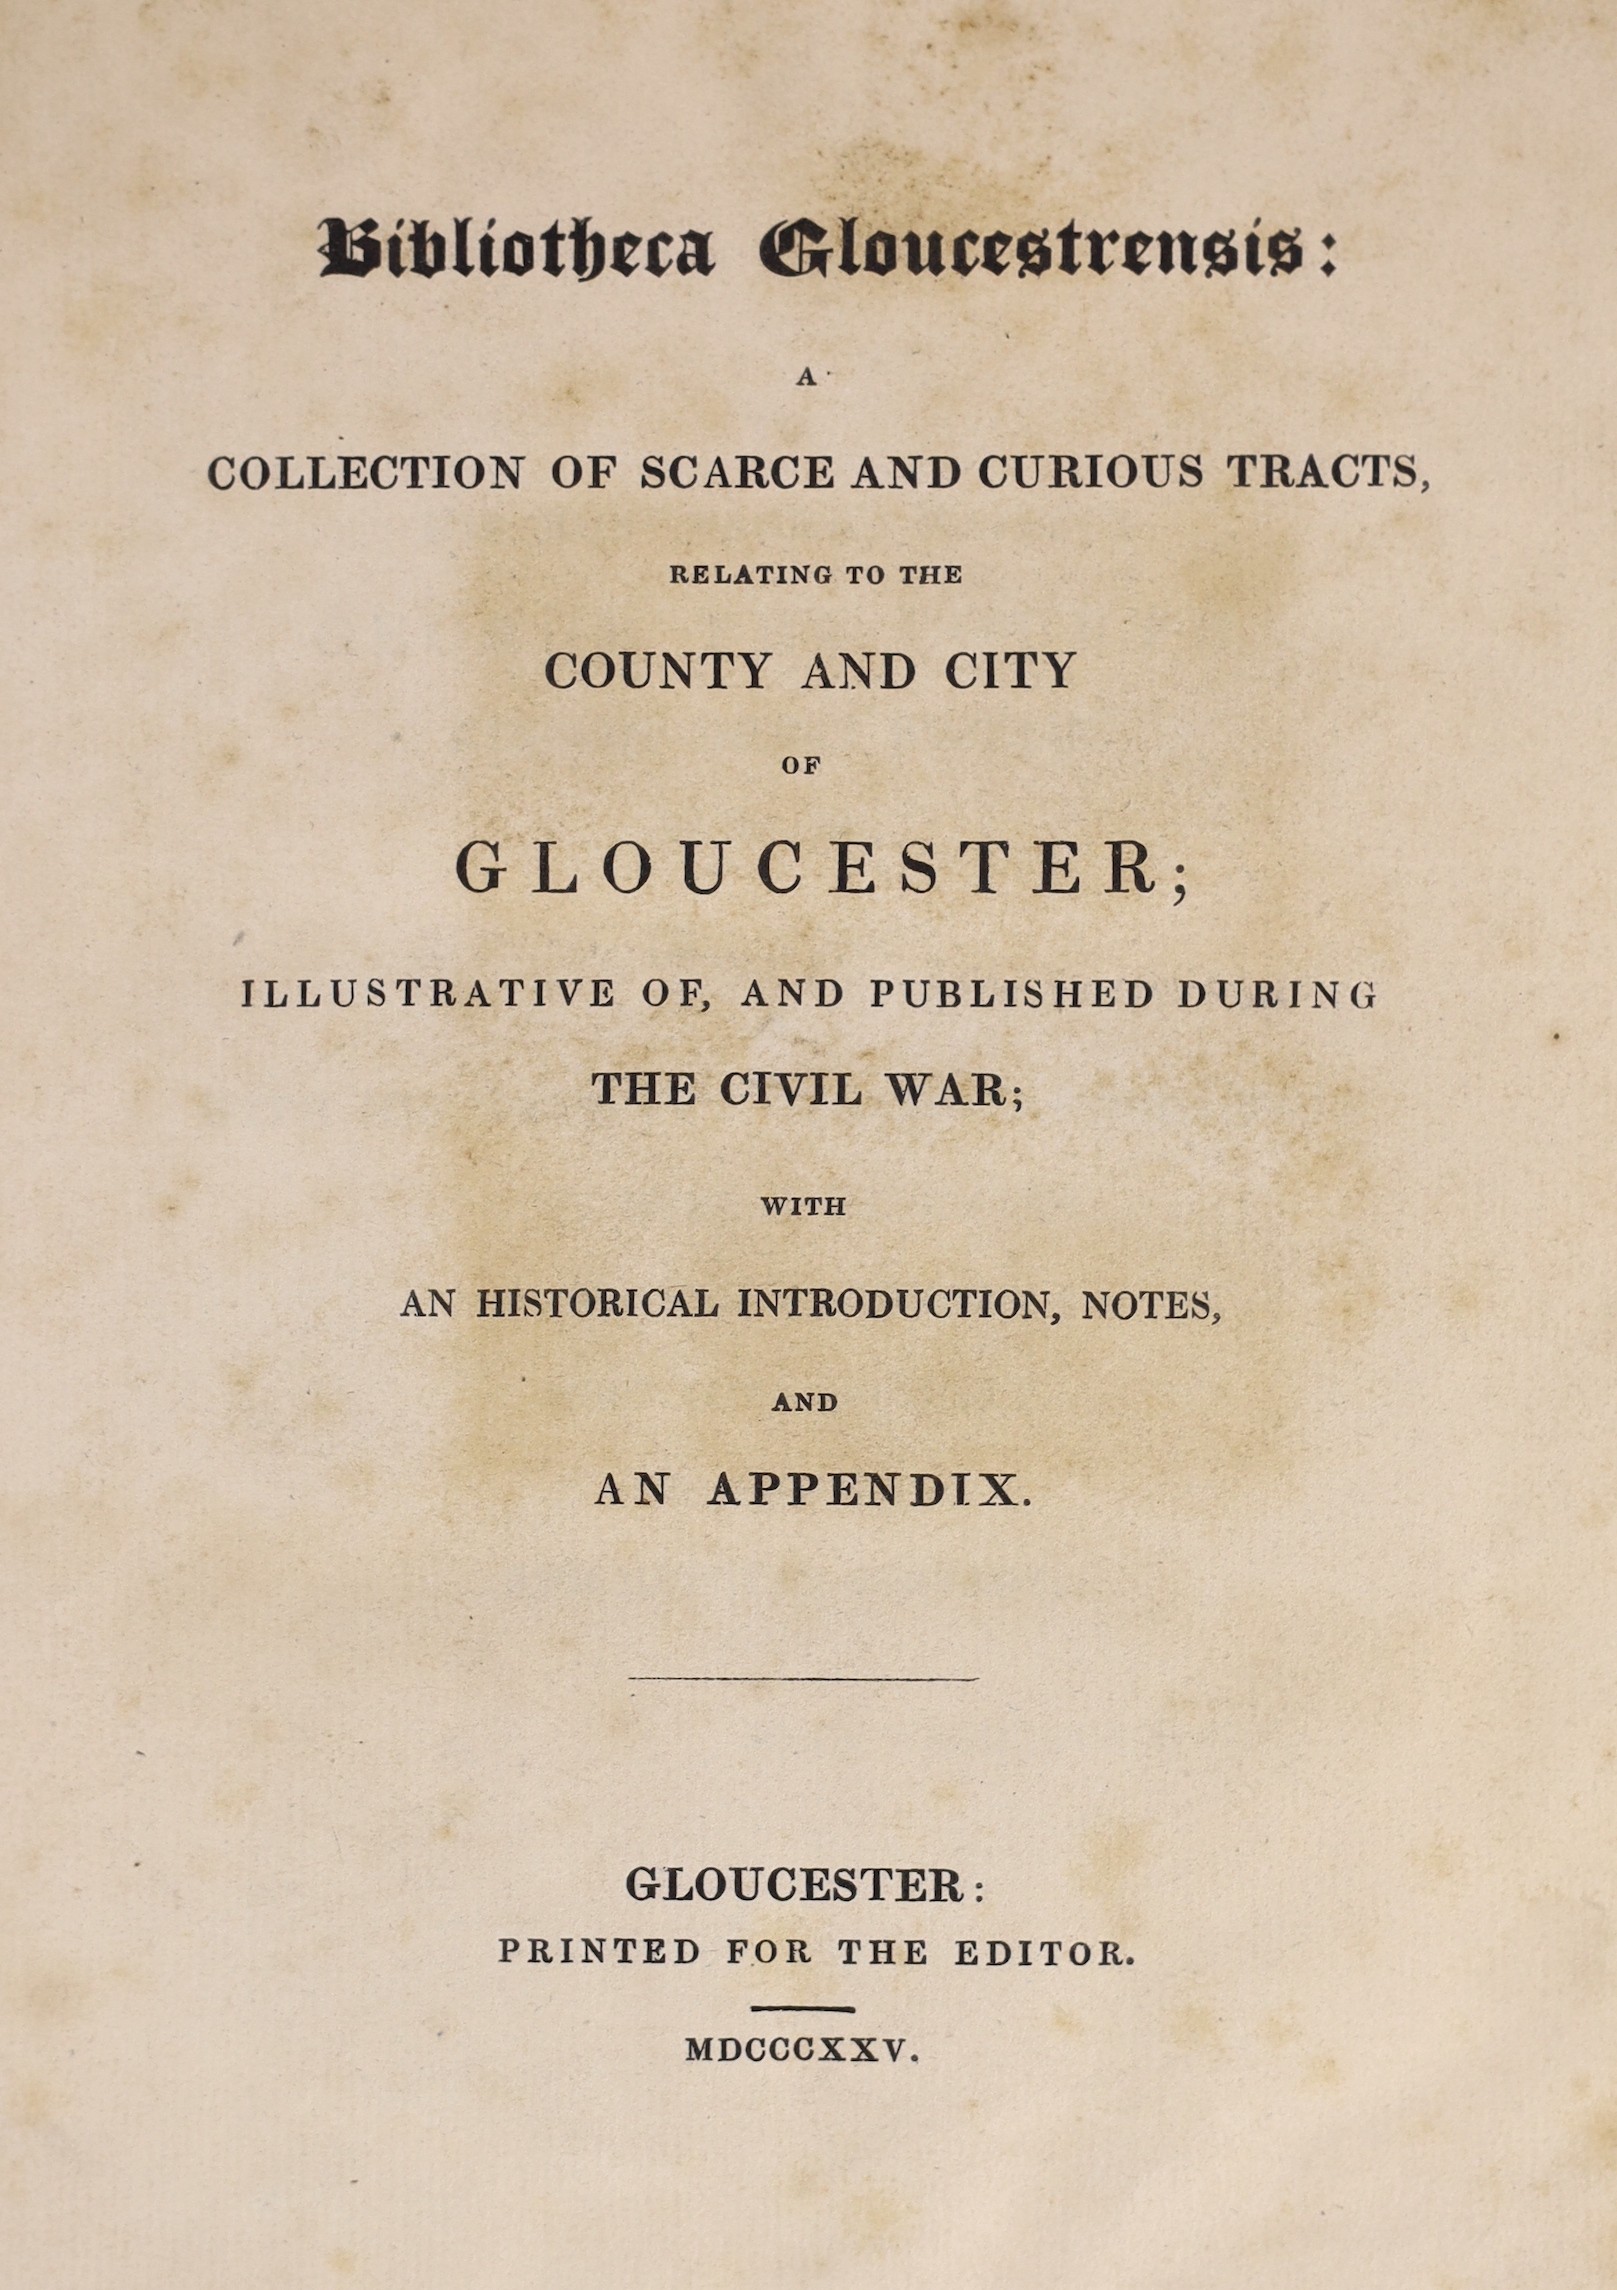 GLOUCESTERSHIRE: Washbourne, John, editor - Bibliotheca Gloucestrensis: a collection of scarce and curious tracts ... illustrative of, and published during the Civil War ... 3 plates, a map                               